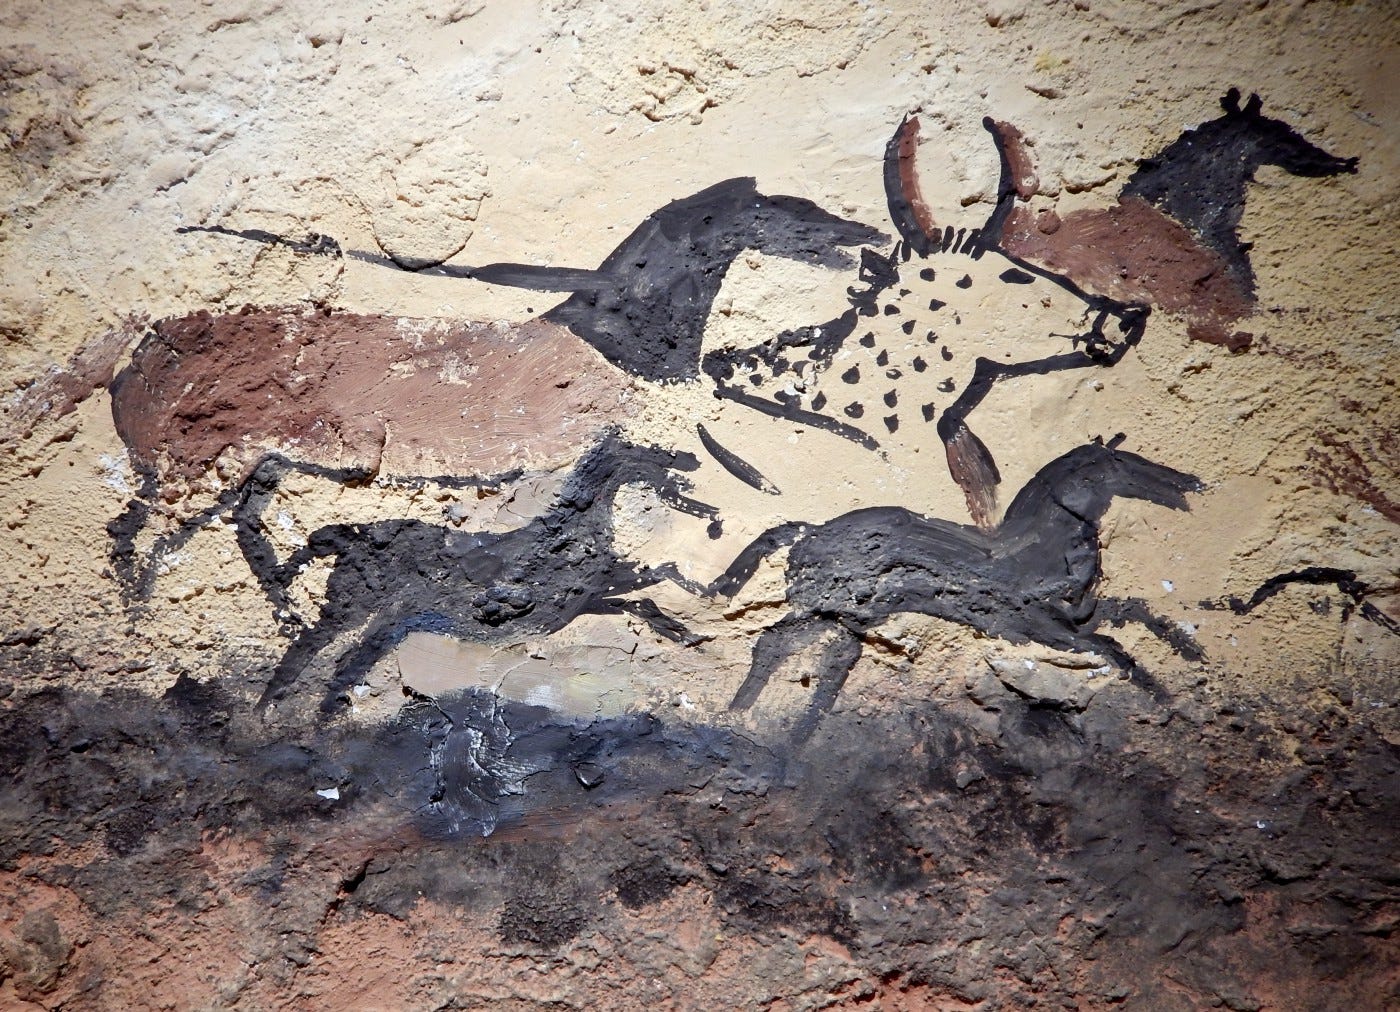 What the Lascaux Cave Paintings Tell Us About the Nature of Human Desire |  by Steve Chatterton | Medium